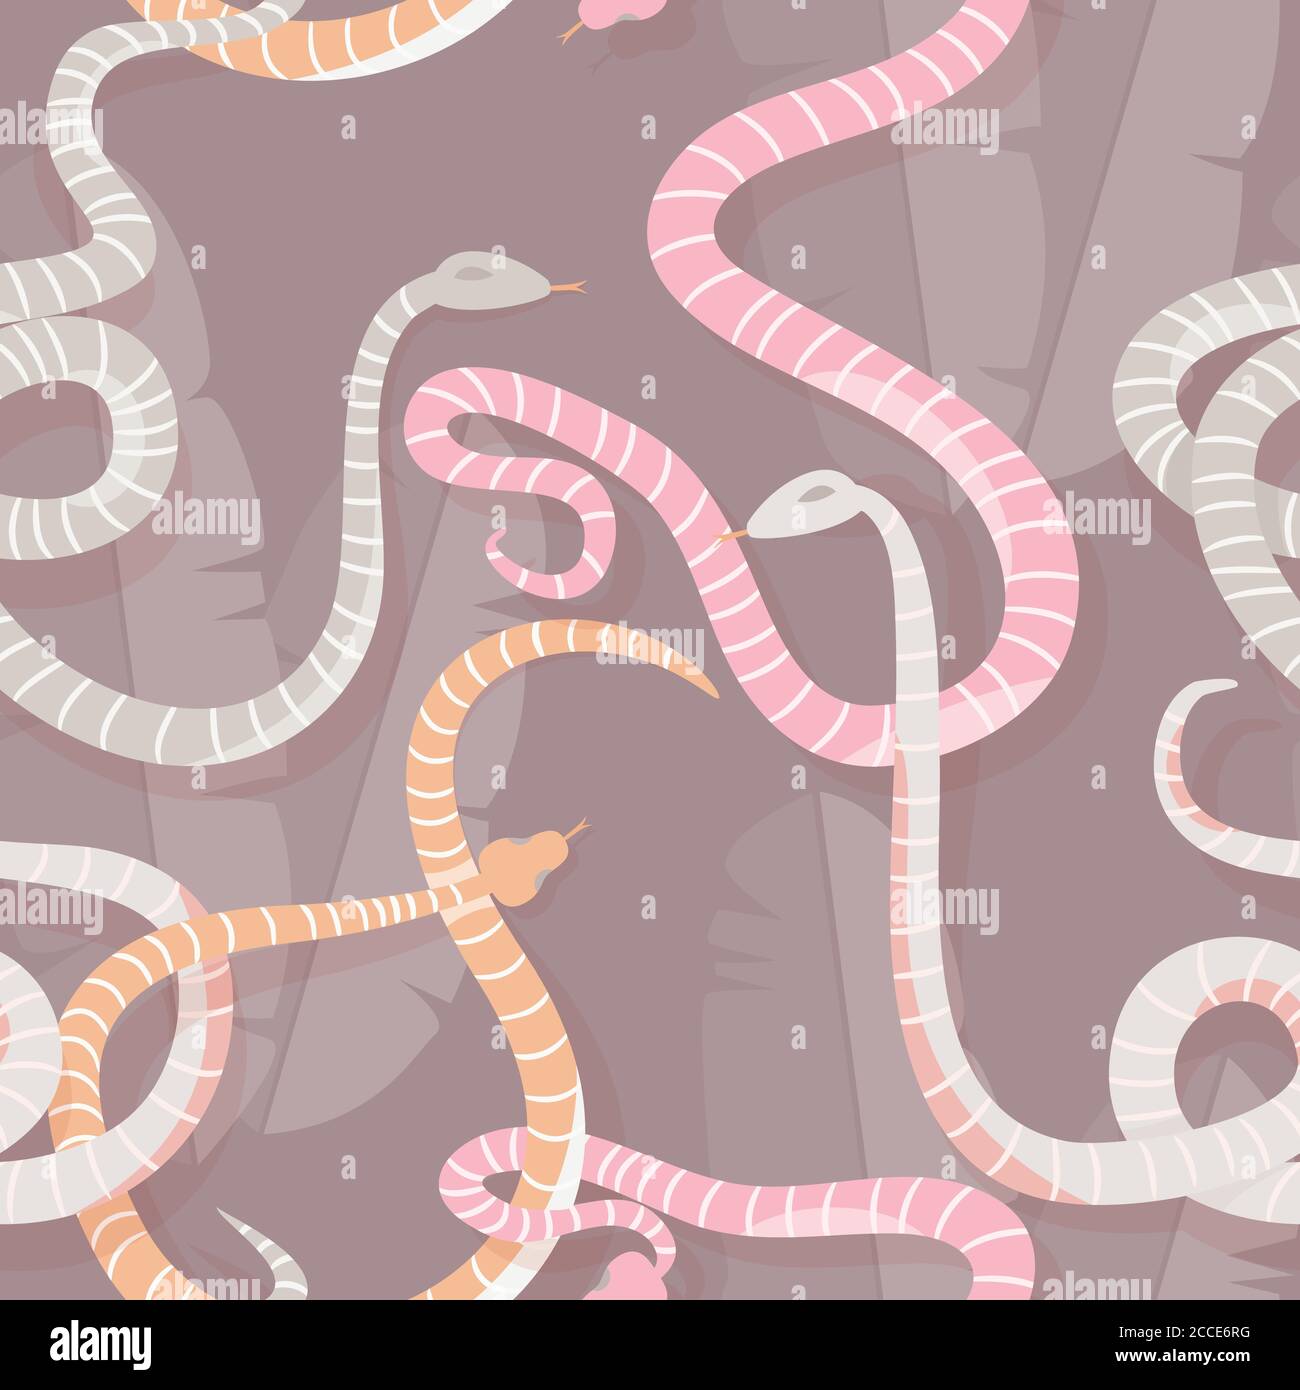 Seamless pattern with colorful intertwined striped rain forest snakes, vector illustration Stock Vector